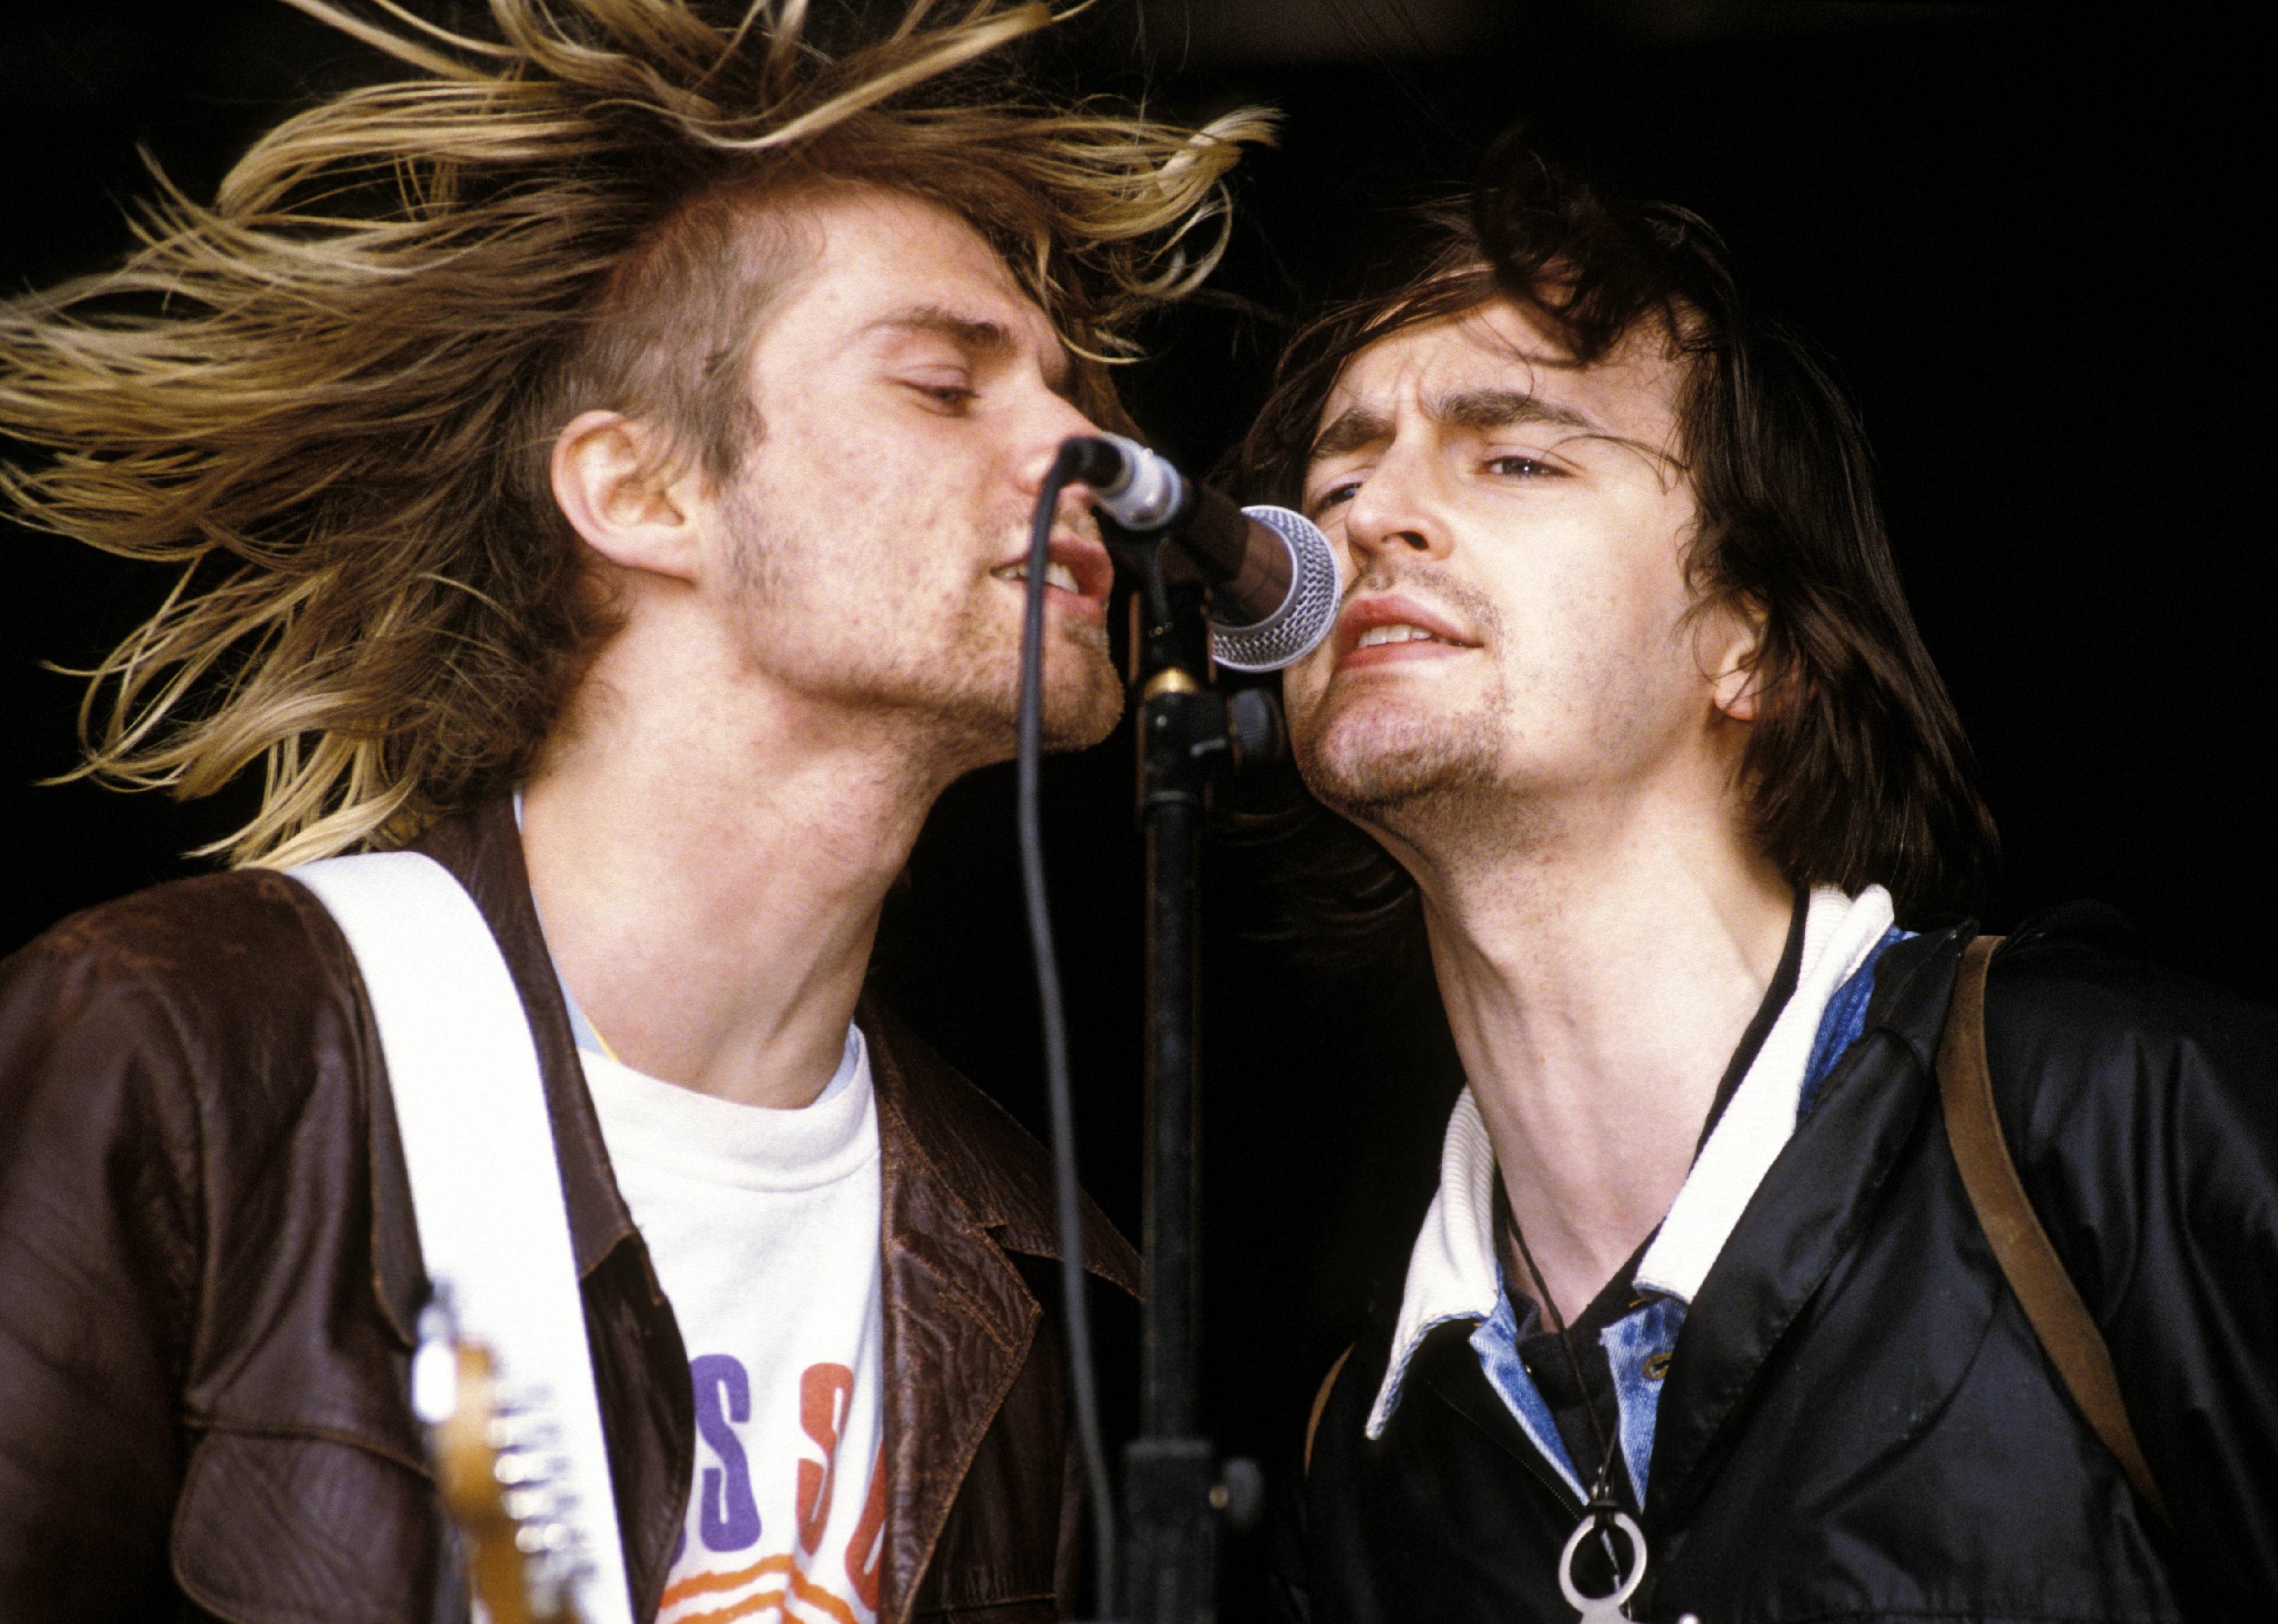 <p>Nirvana's headlining gig at this U.K. music festival was preceded by all kinds of negative press, including rumors of drug addiction and ill health. Kurt Cobain tackled the gossip head-on by <a href="https://www.loudersound.com/features/nirvana-at-reading-1992-a-story-of-rumours-a-wheelchair-and-salvation">rolling out in a wheelchair and feigning sickness</a> before launching into one of the band's most memorable performances. The rest is grunge history.</p>